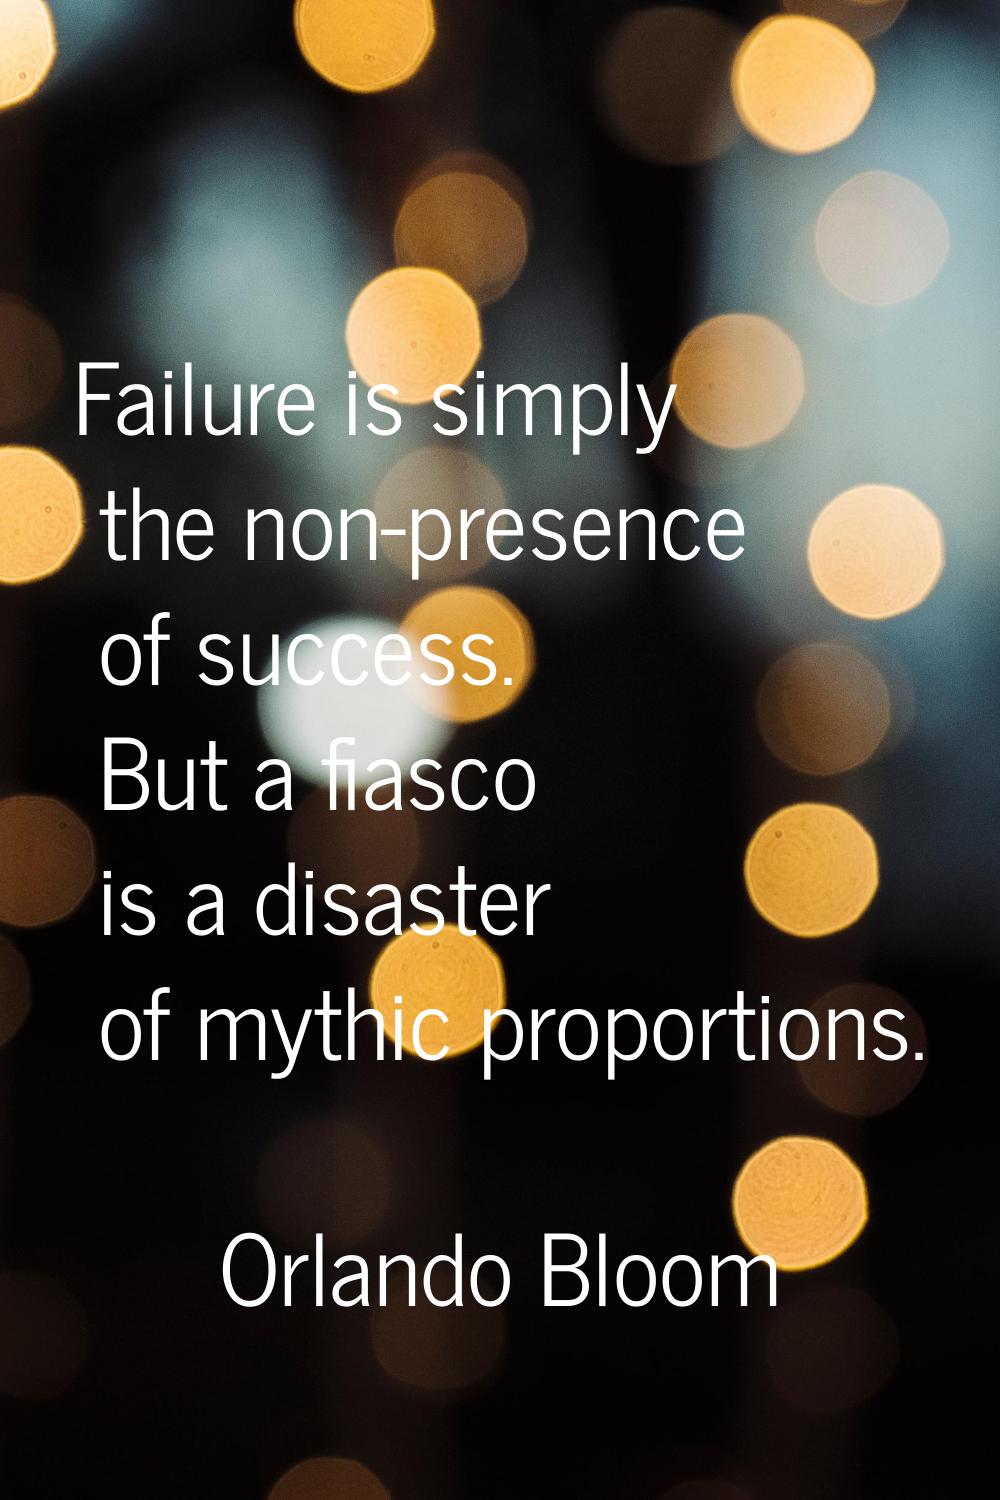 Failure is simply the non-presence of success. But a fiasco is a disaster of mythic proportions.